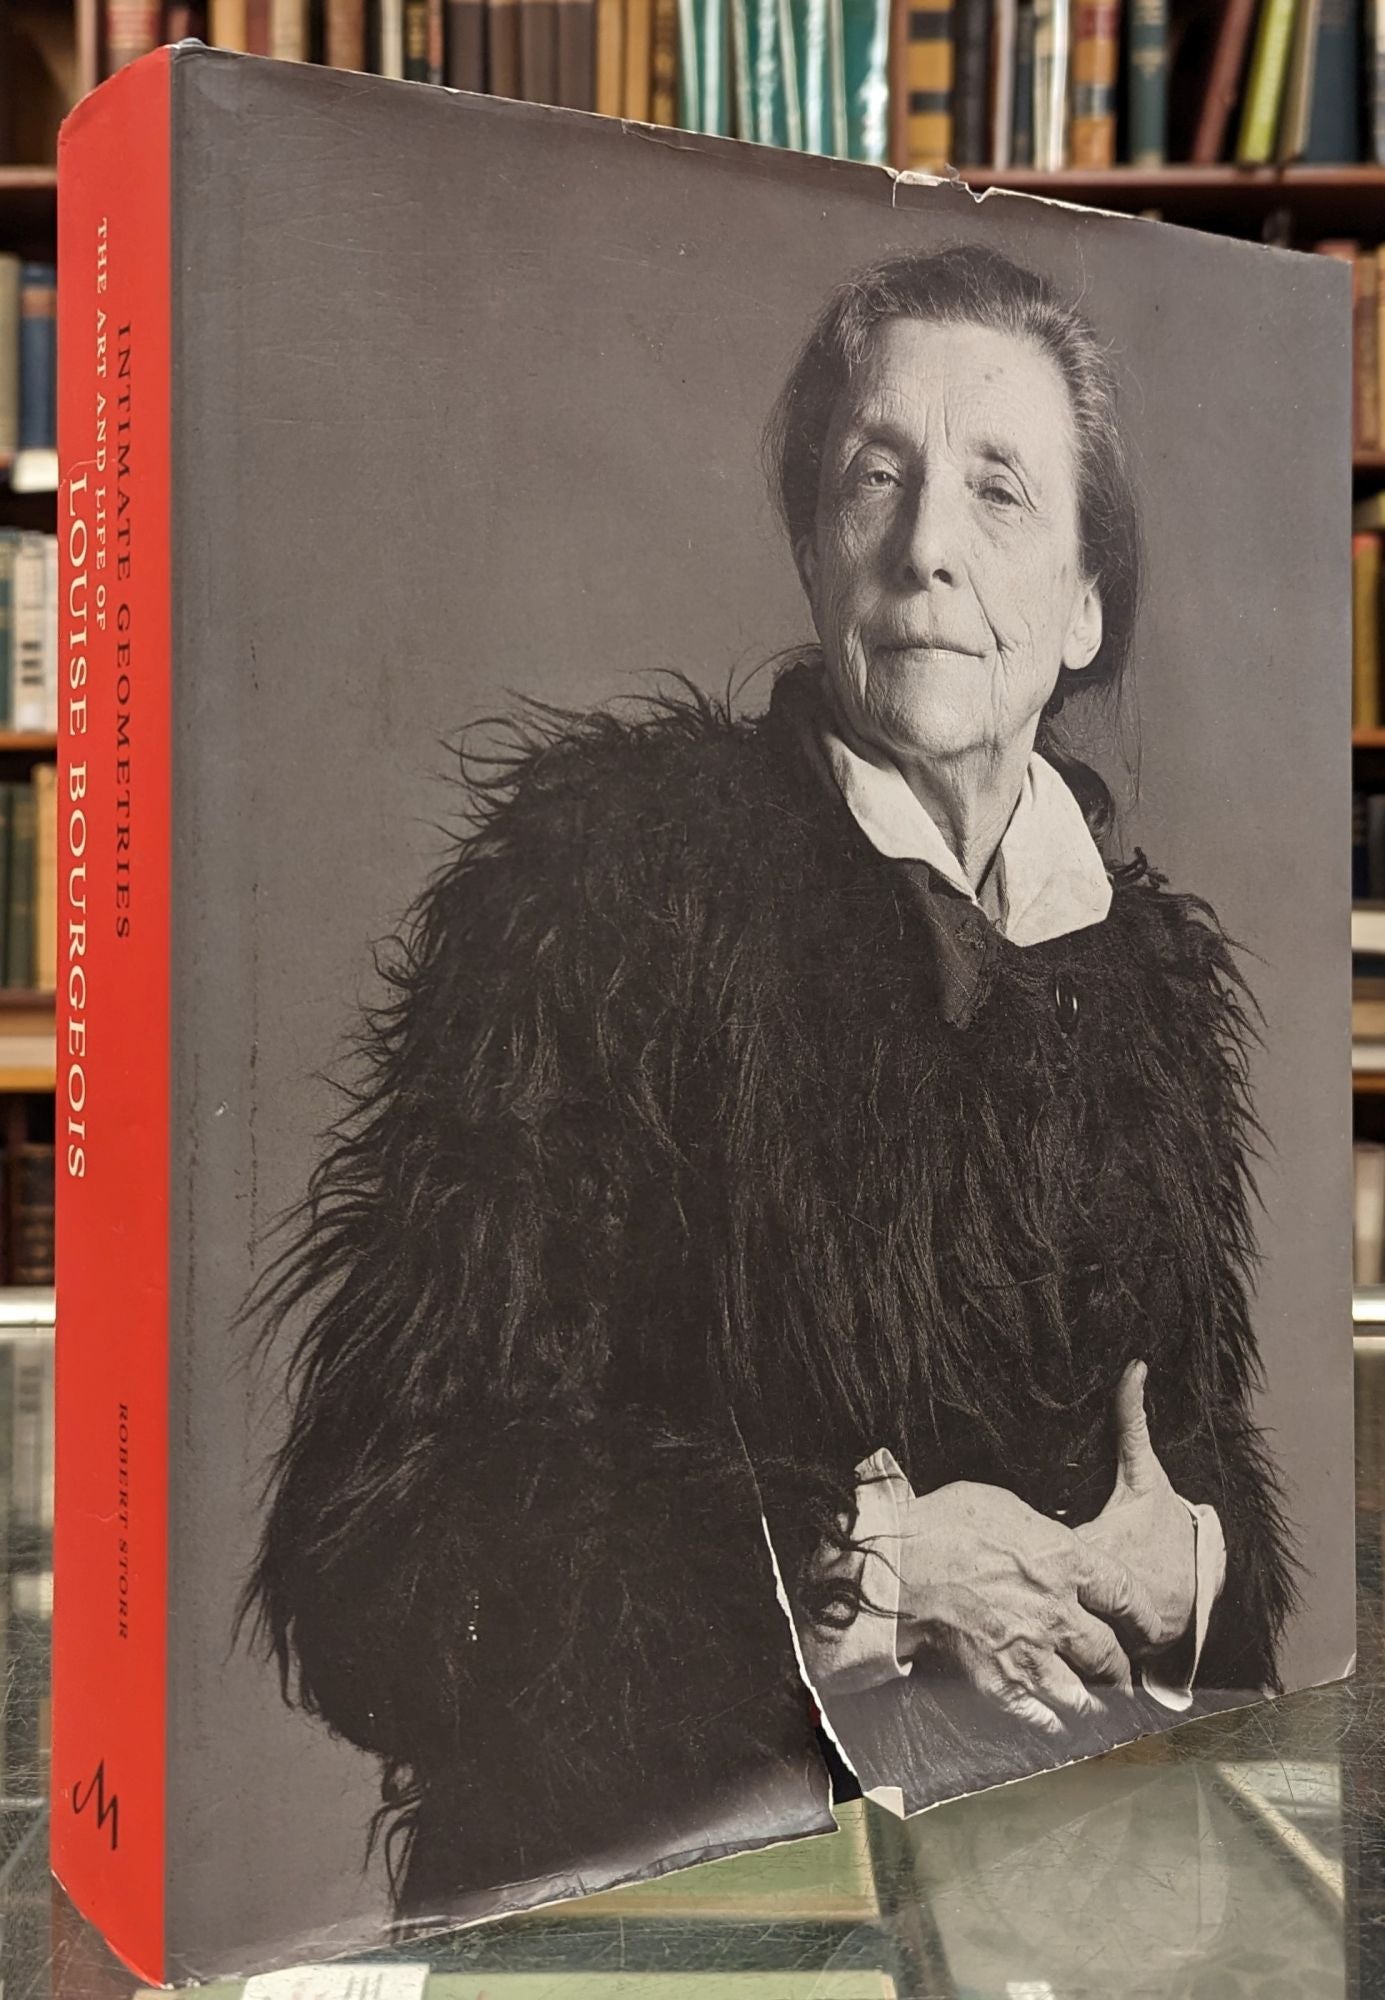 Intimate Geometries: The Art and Life of Louise Bourgeois